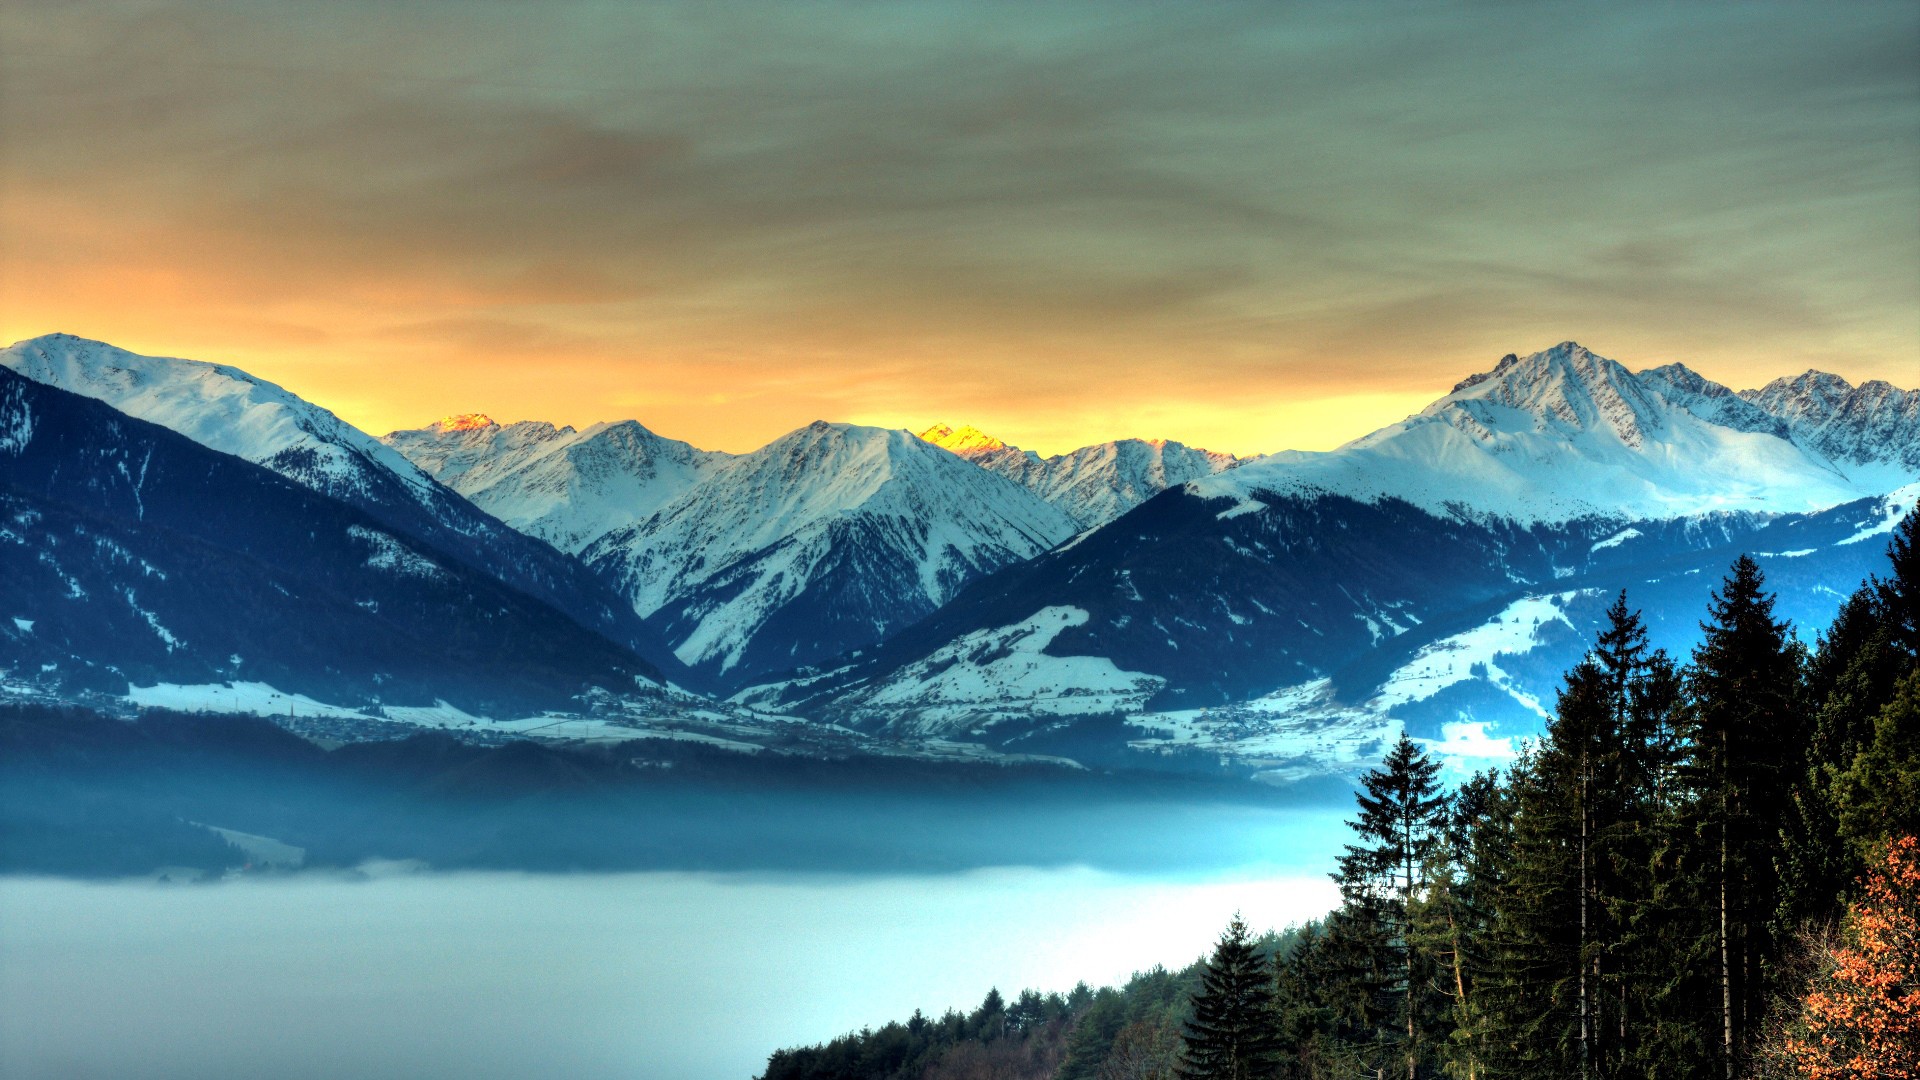 General 1920x1080 landscape nature mountains hills clouds rocks evening mist sunset snowy peak trees forest house pine trees